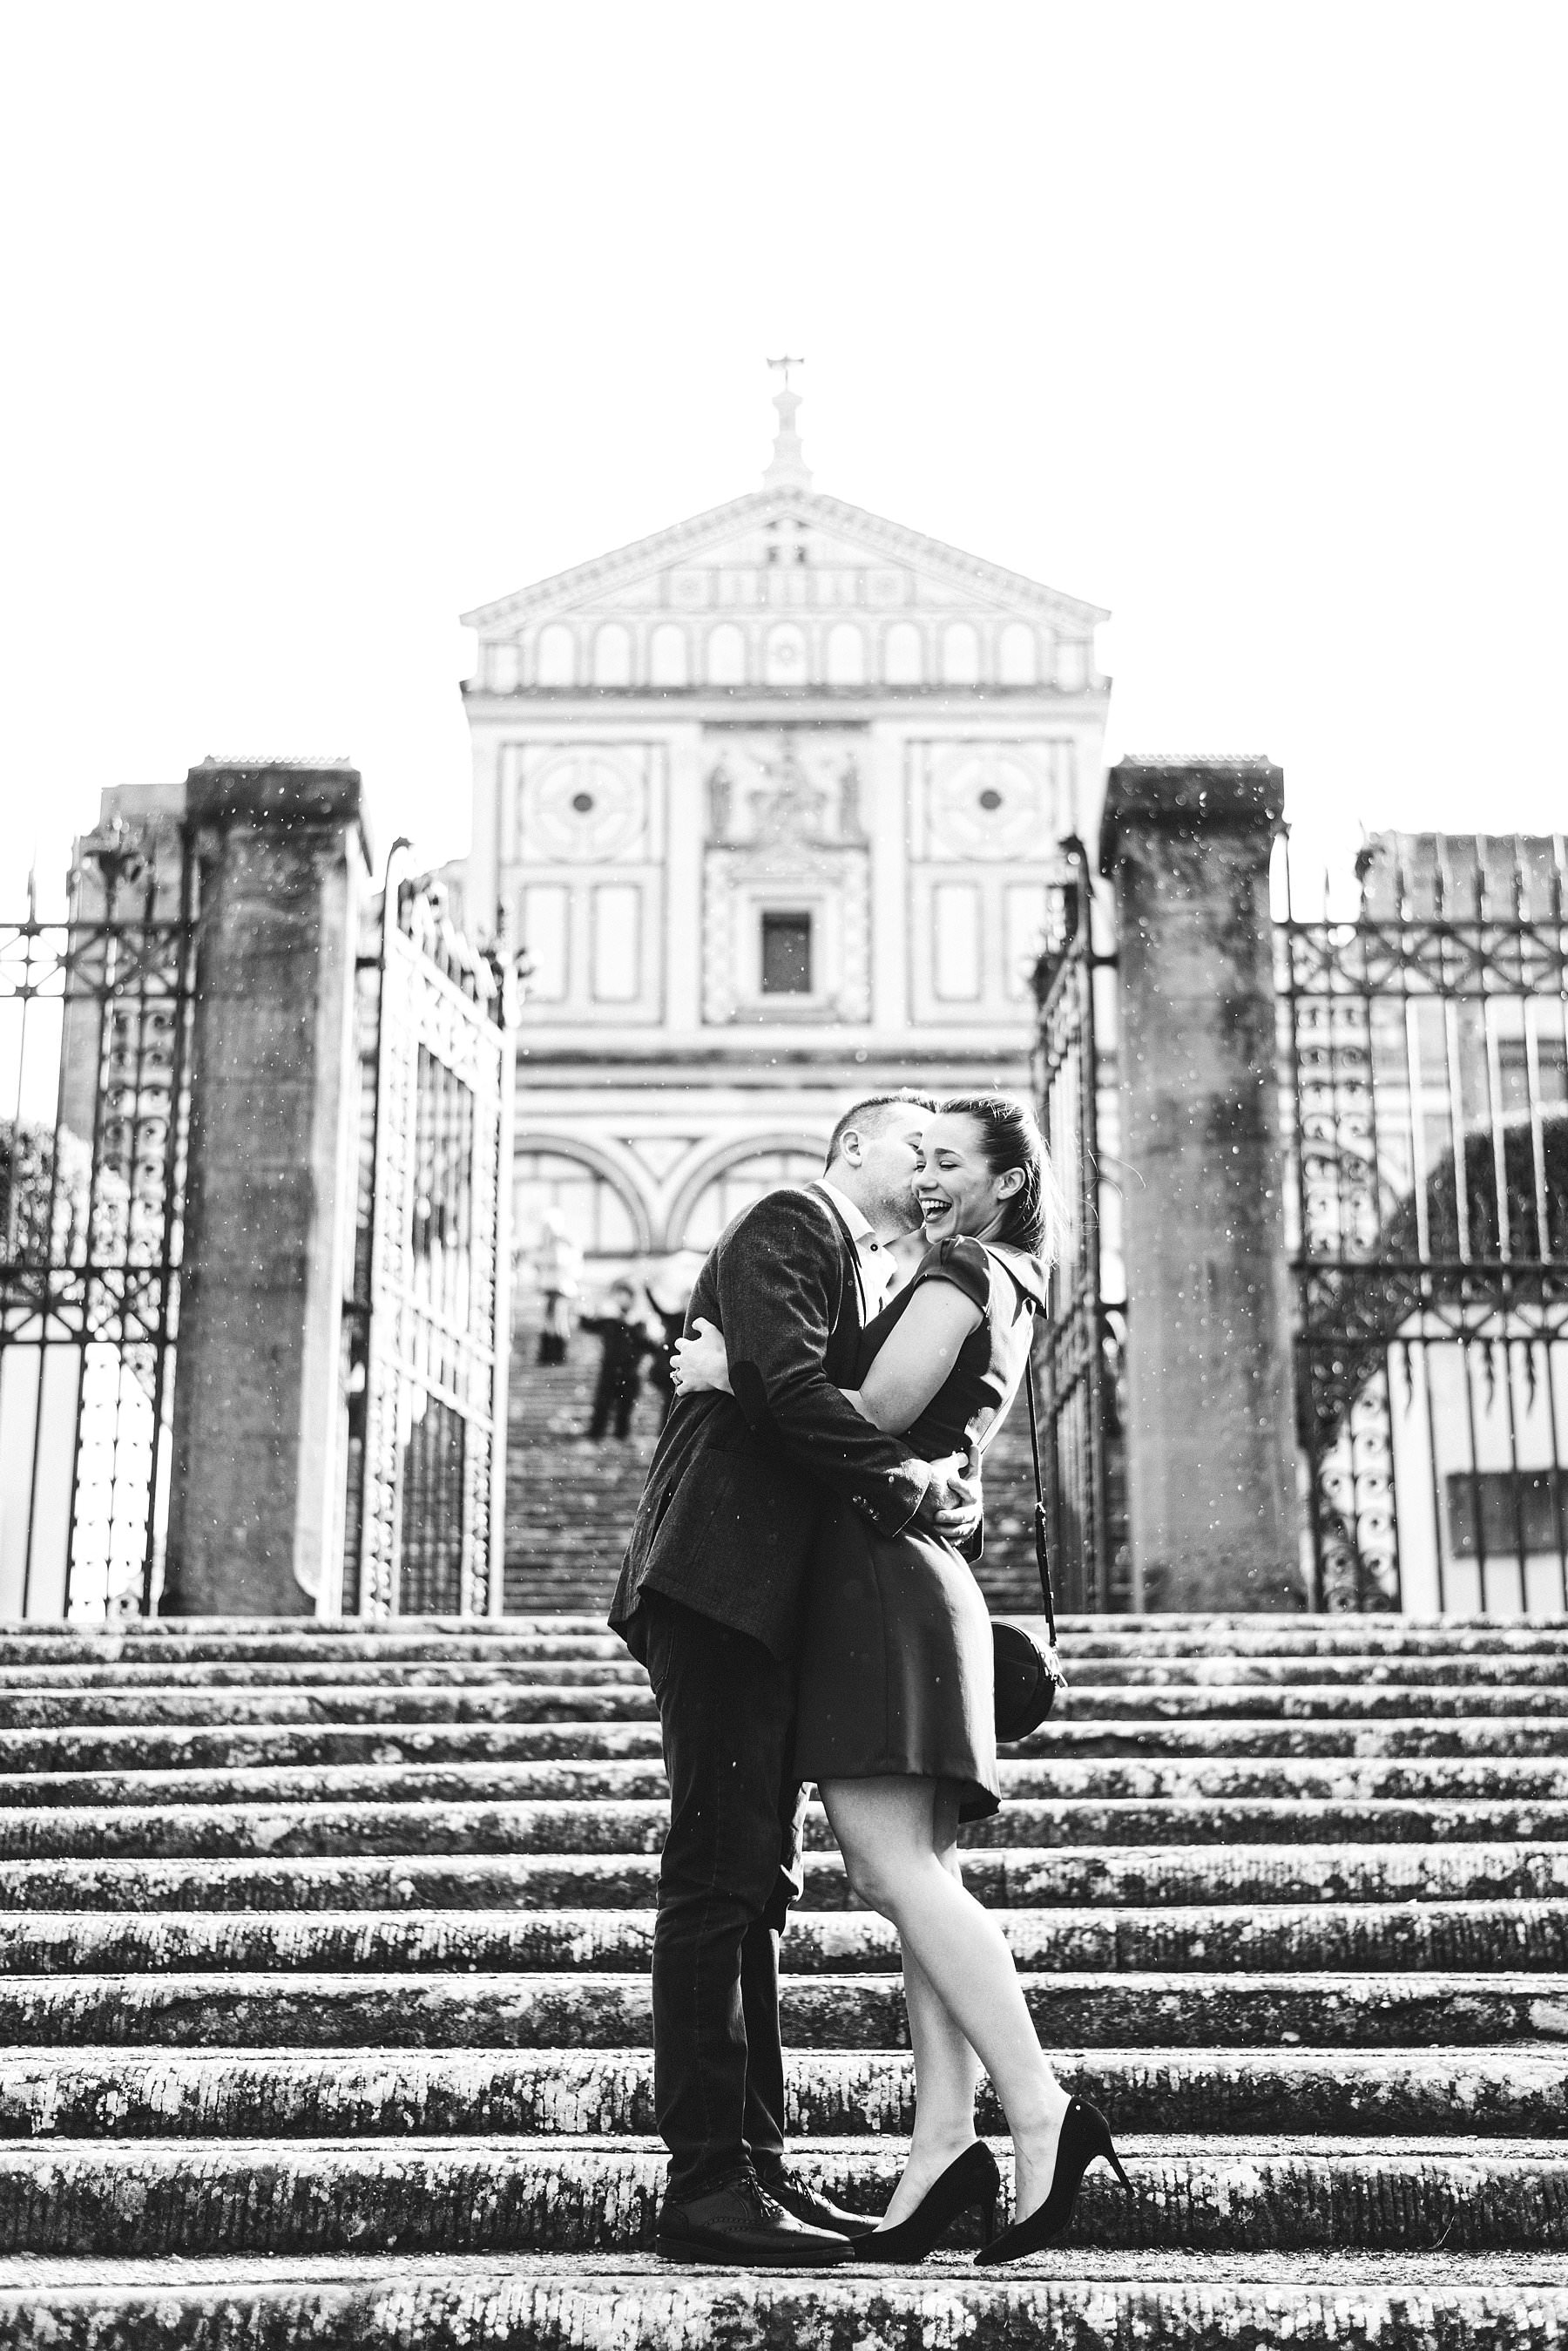 Cara and Vincent’s exciting and lovely surprise proposal and photoshoot under light rain at San Miniato al Monte near Piazzale Michelangelo in Florence